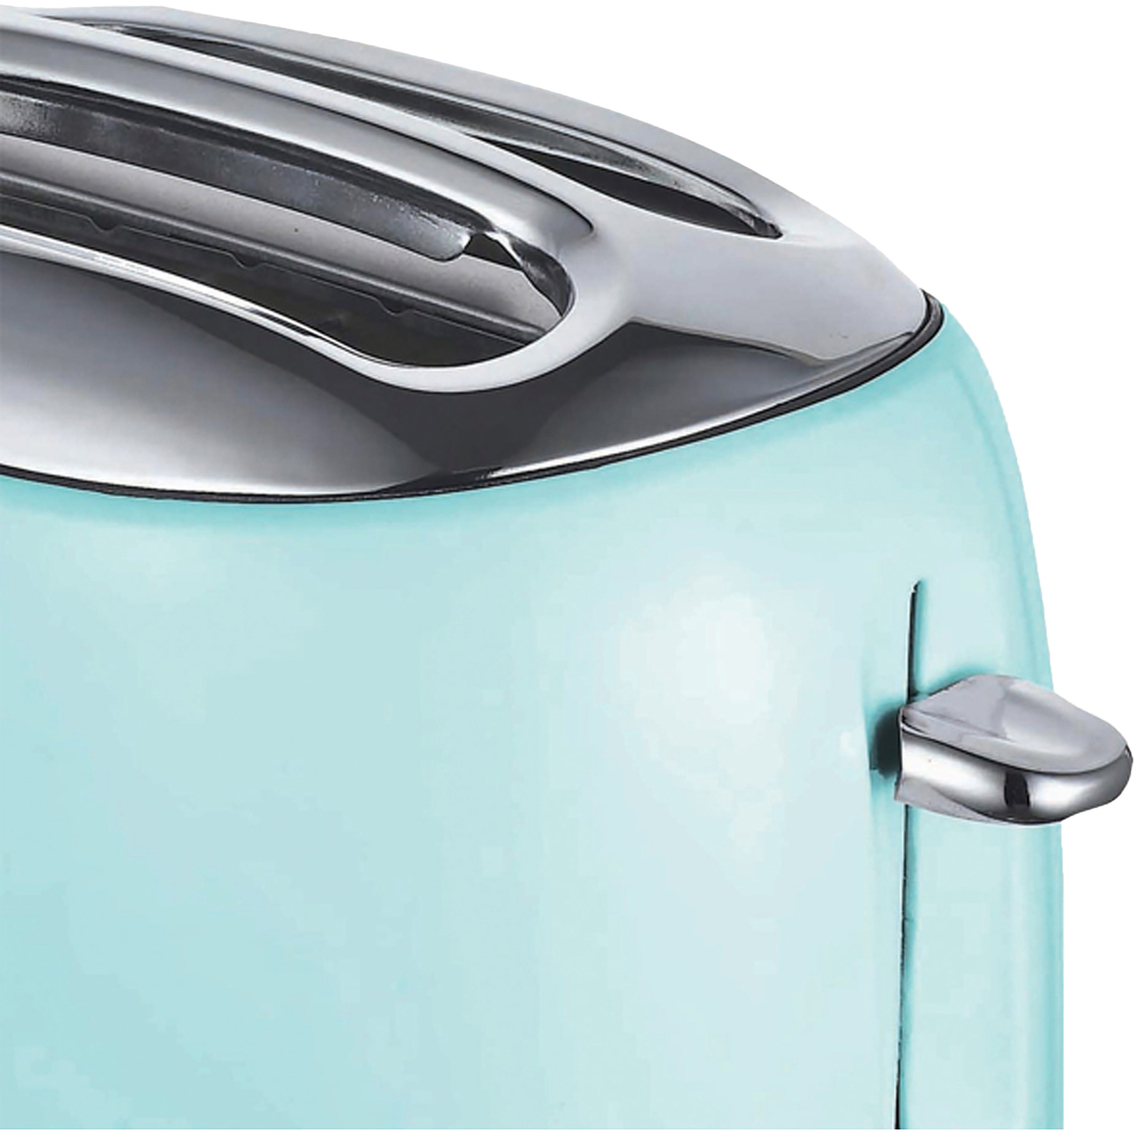 Brentwood Cool Touch 2 Slice Extra Wide Slot Retro Toaster - Image 4 of 8